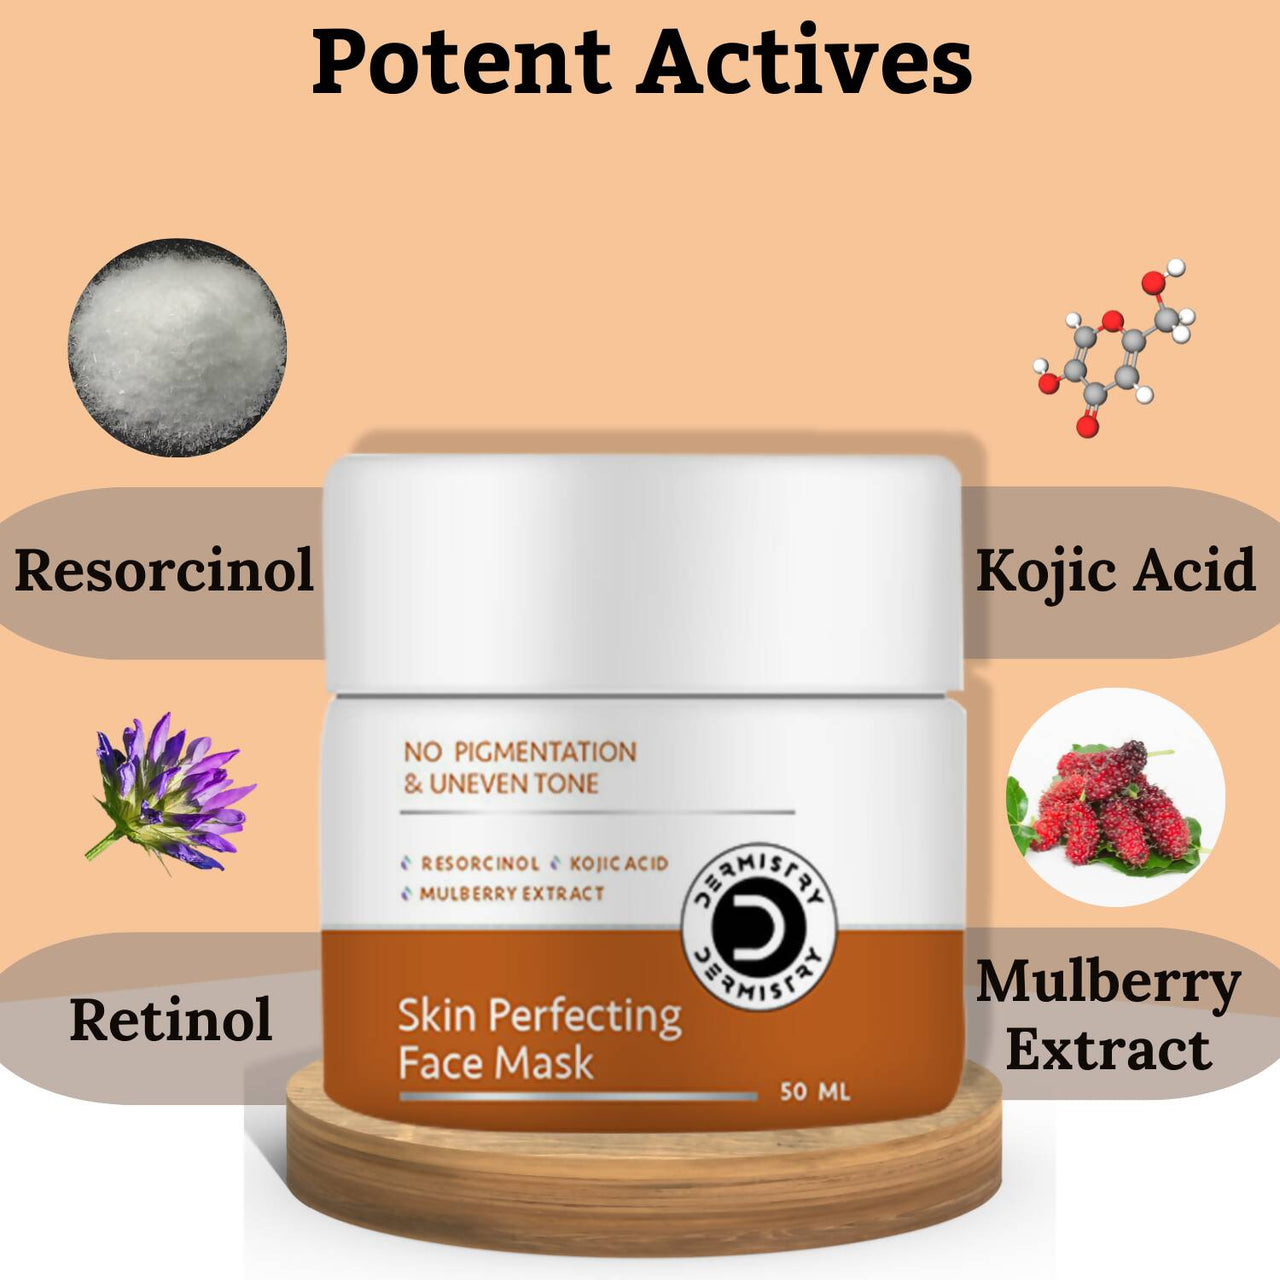 Dermistry Skin Perfecting Face Cream & Skin Perfecting Face Mask - Distacart